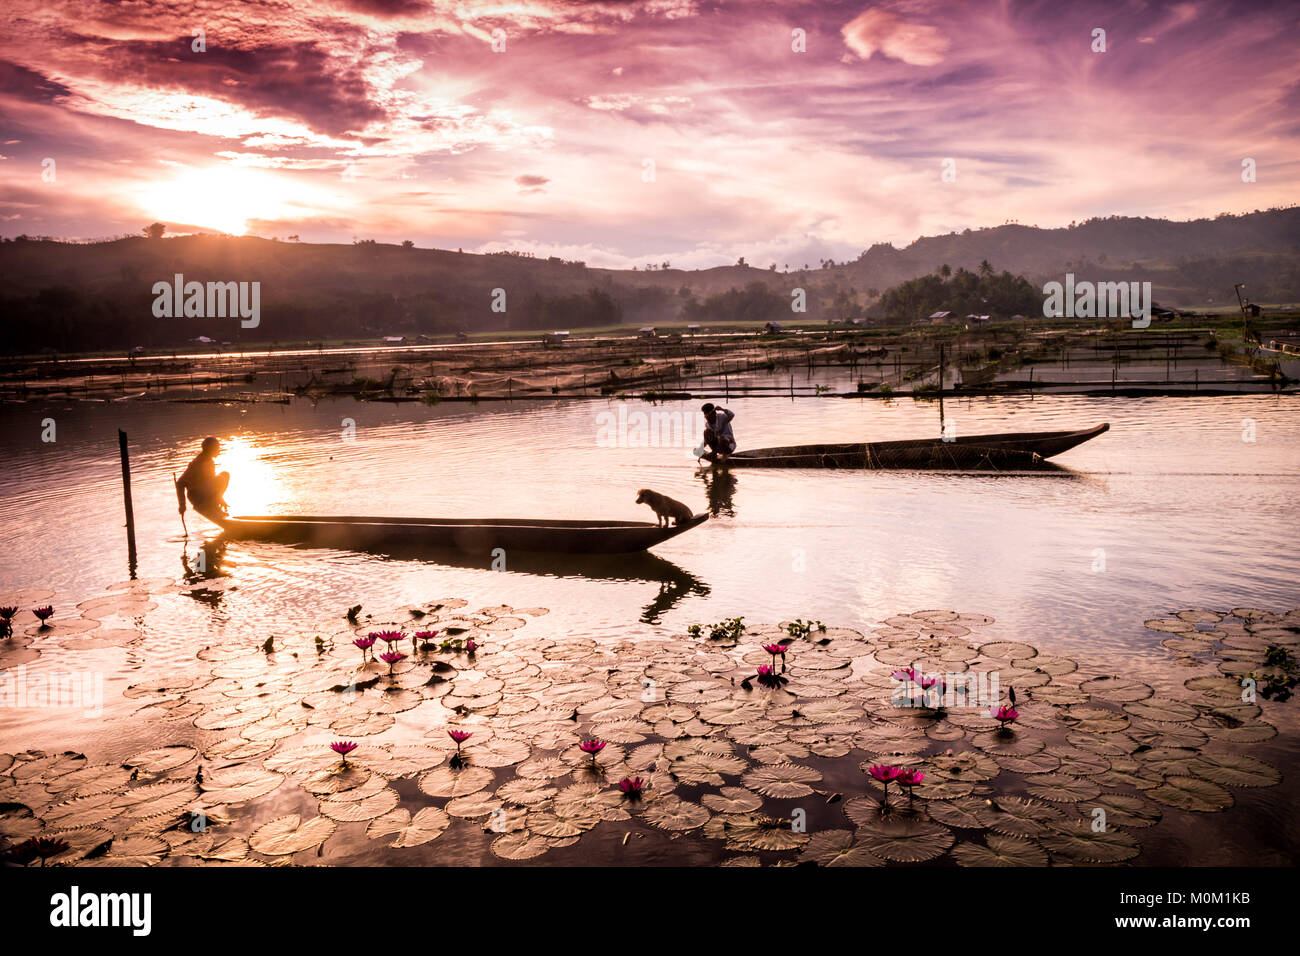 men board the traditional T'boli canoe 'owung' to check the fishing nets around the lake. Stock Photo